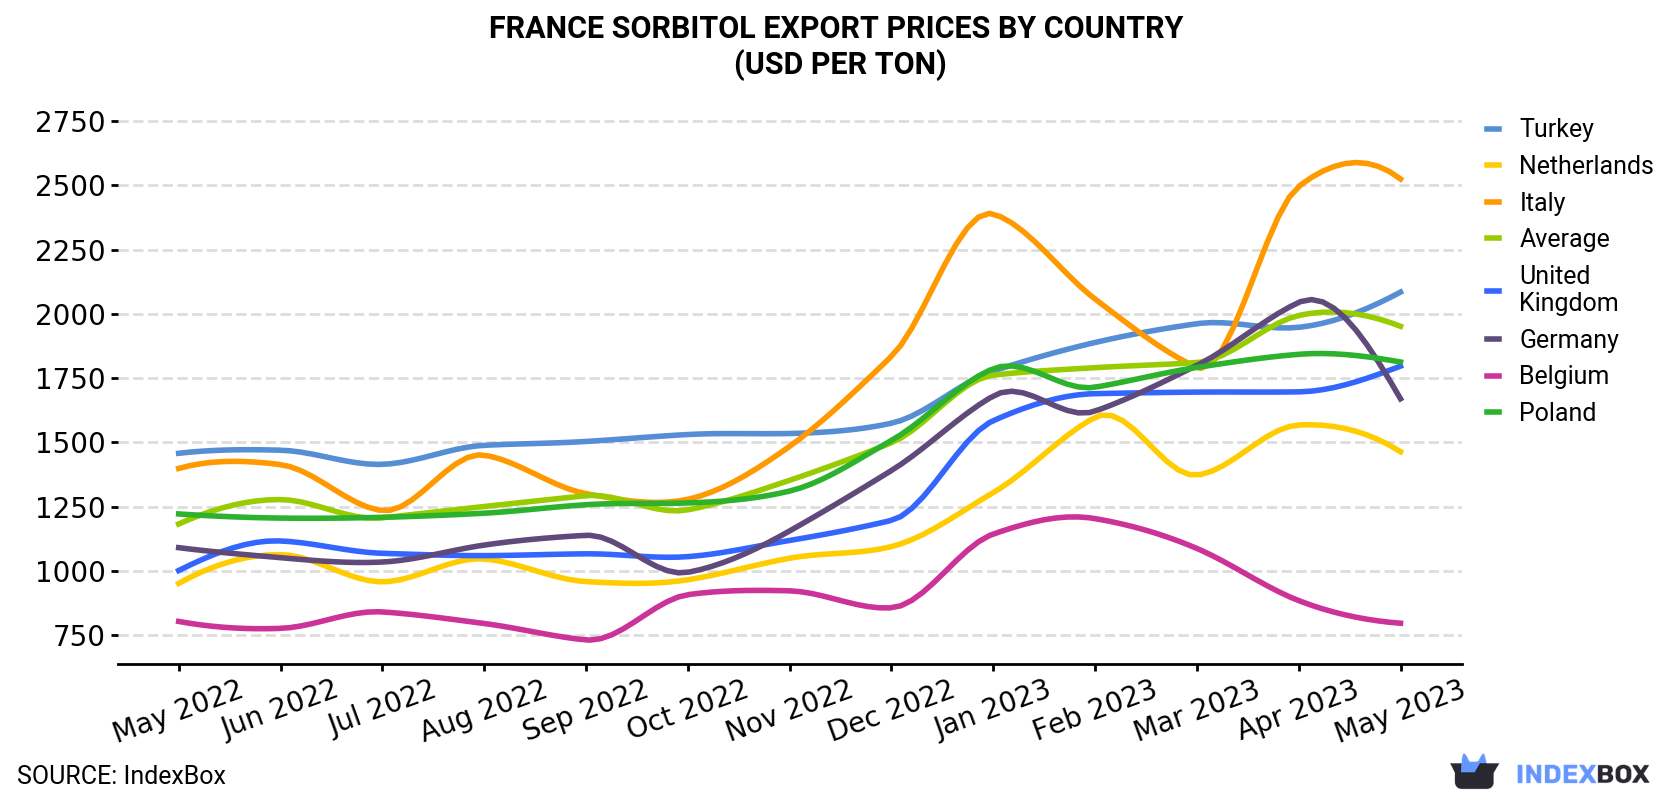 France Sorbitol Export Prices By Country (USD Per Ton)